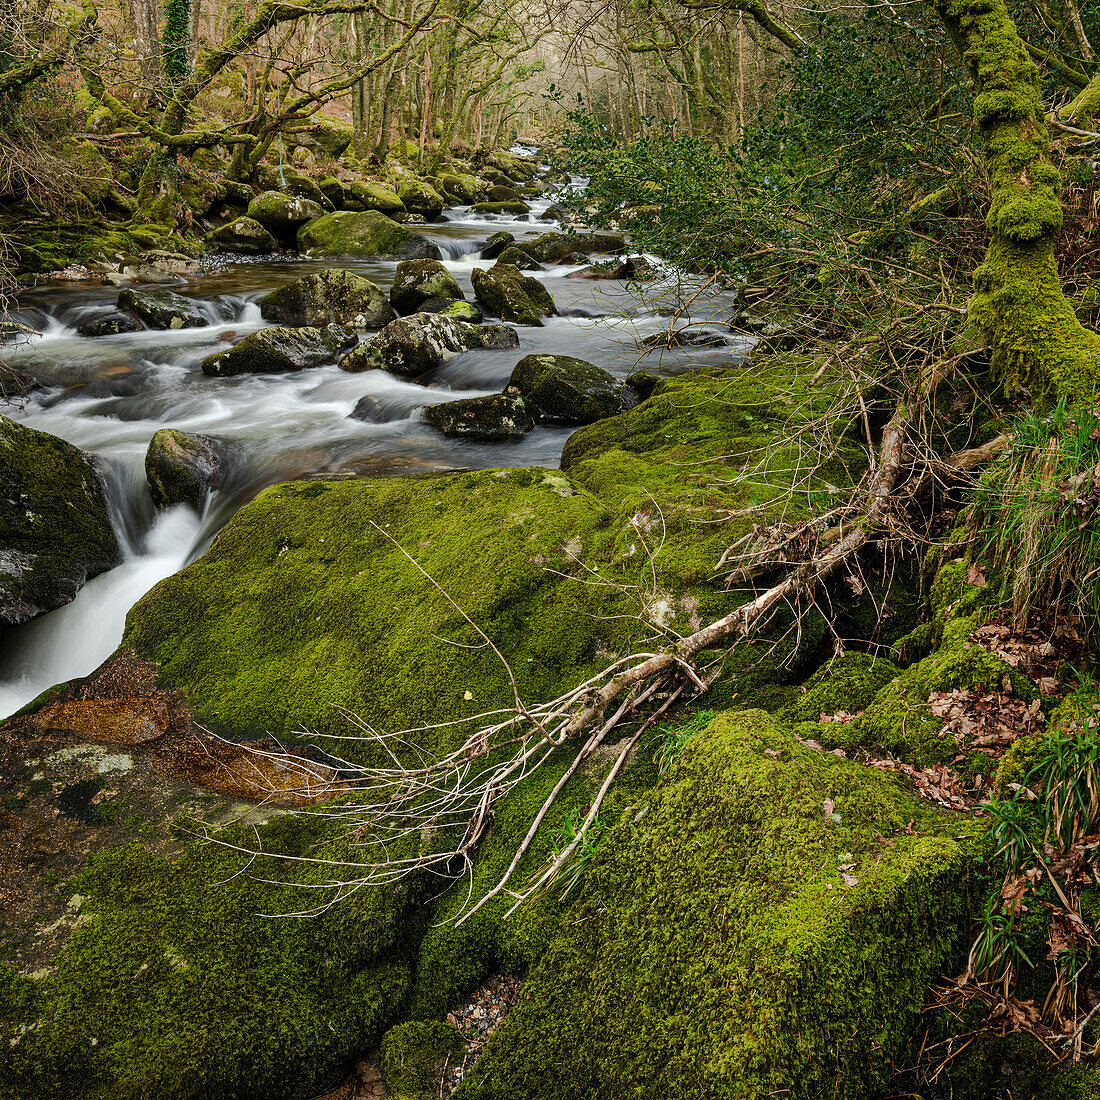 Moss-covered boulders and trees along the River Plym,Dewerstone,Dartmoor National Park,Devon,England,United Kingdom,Europe